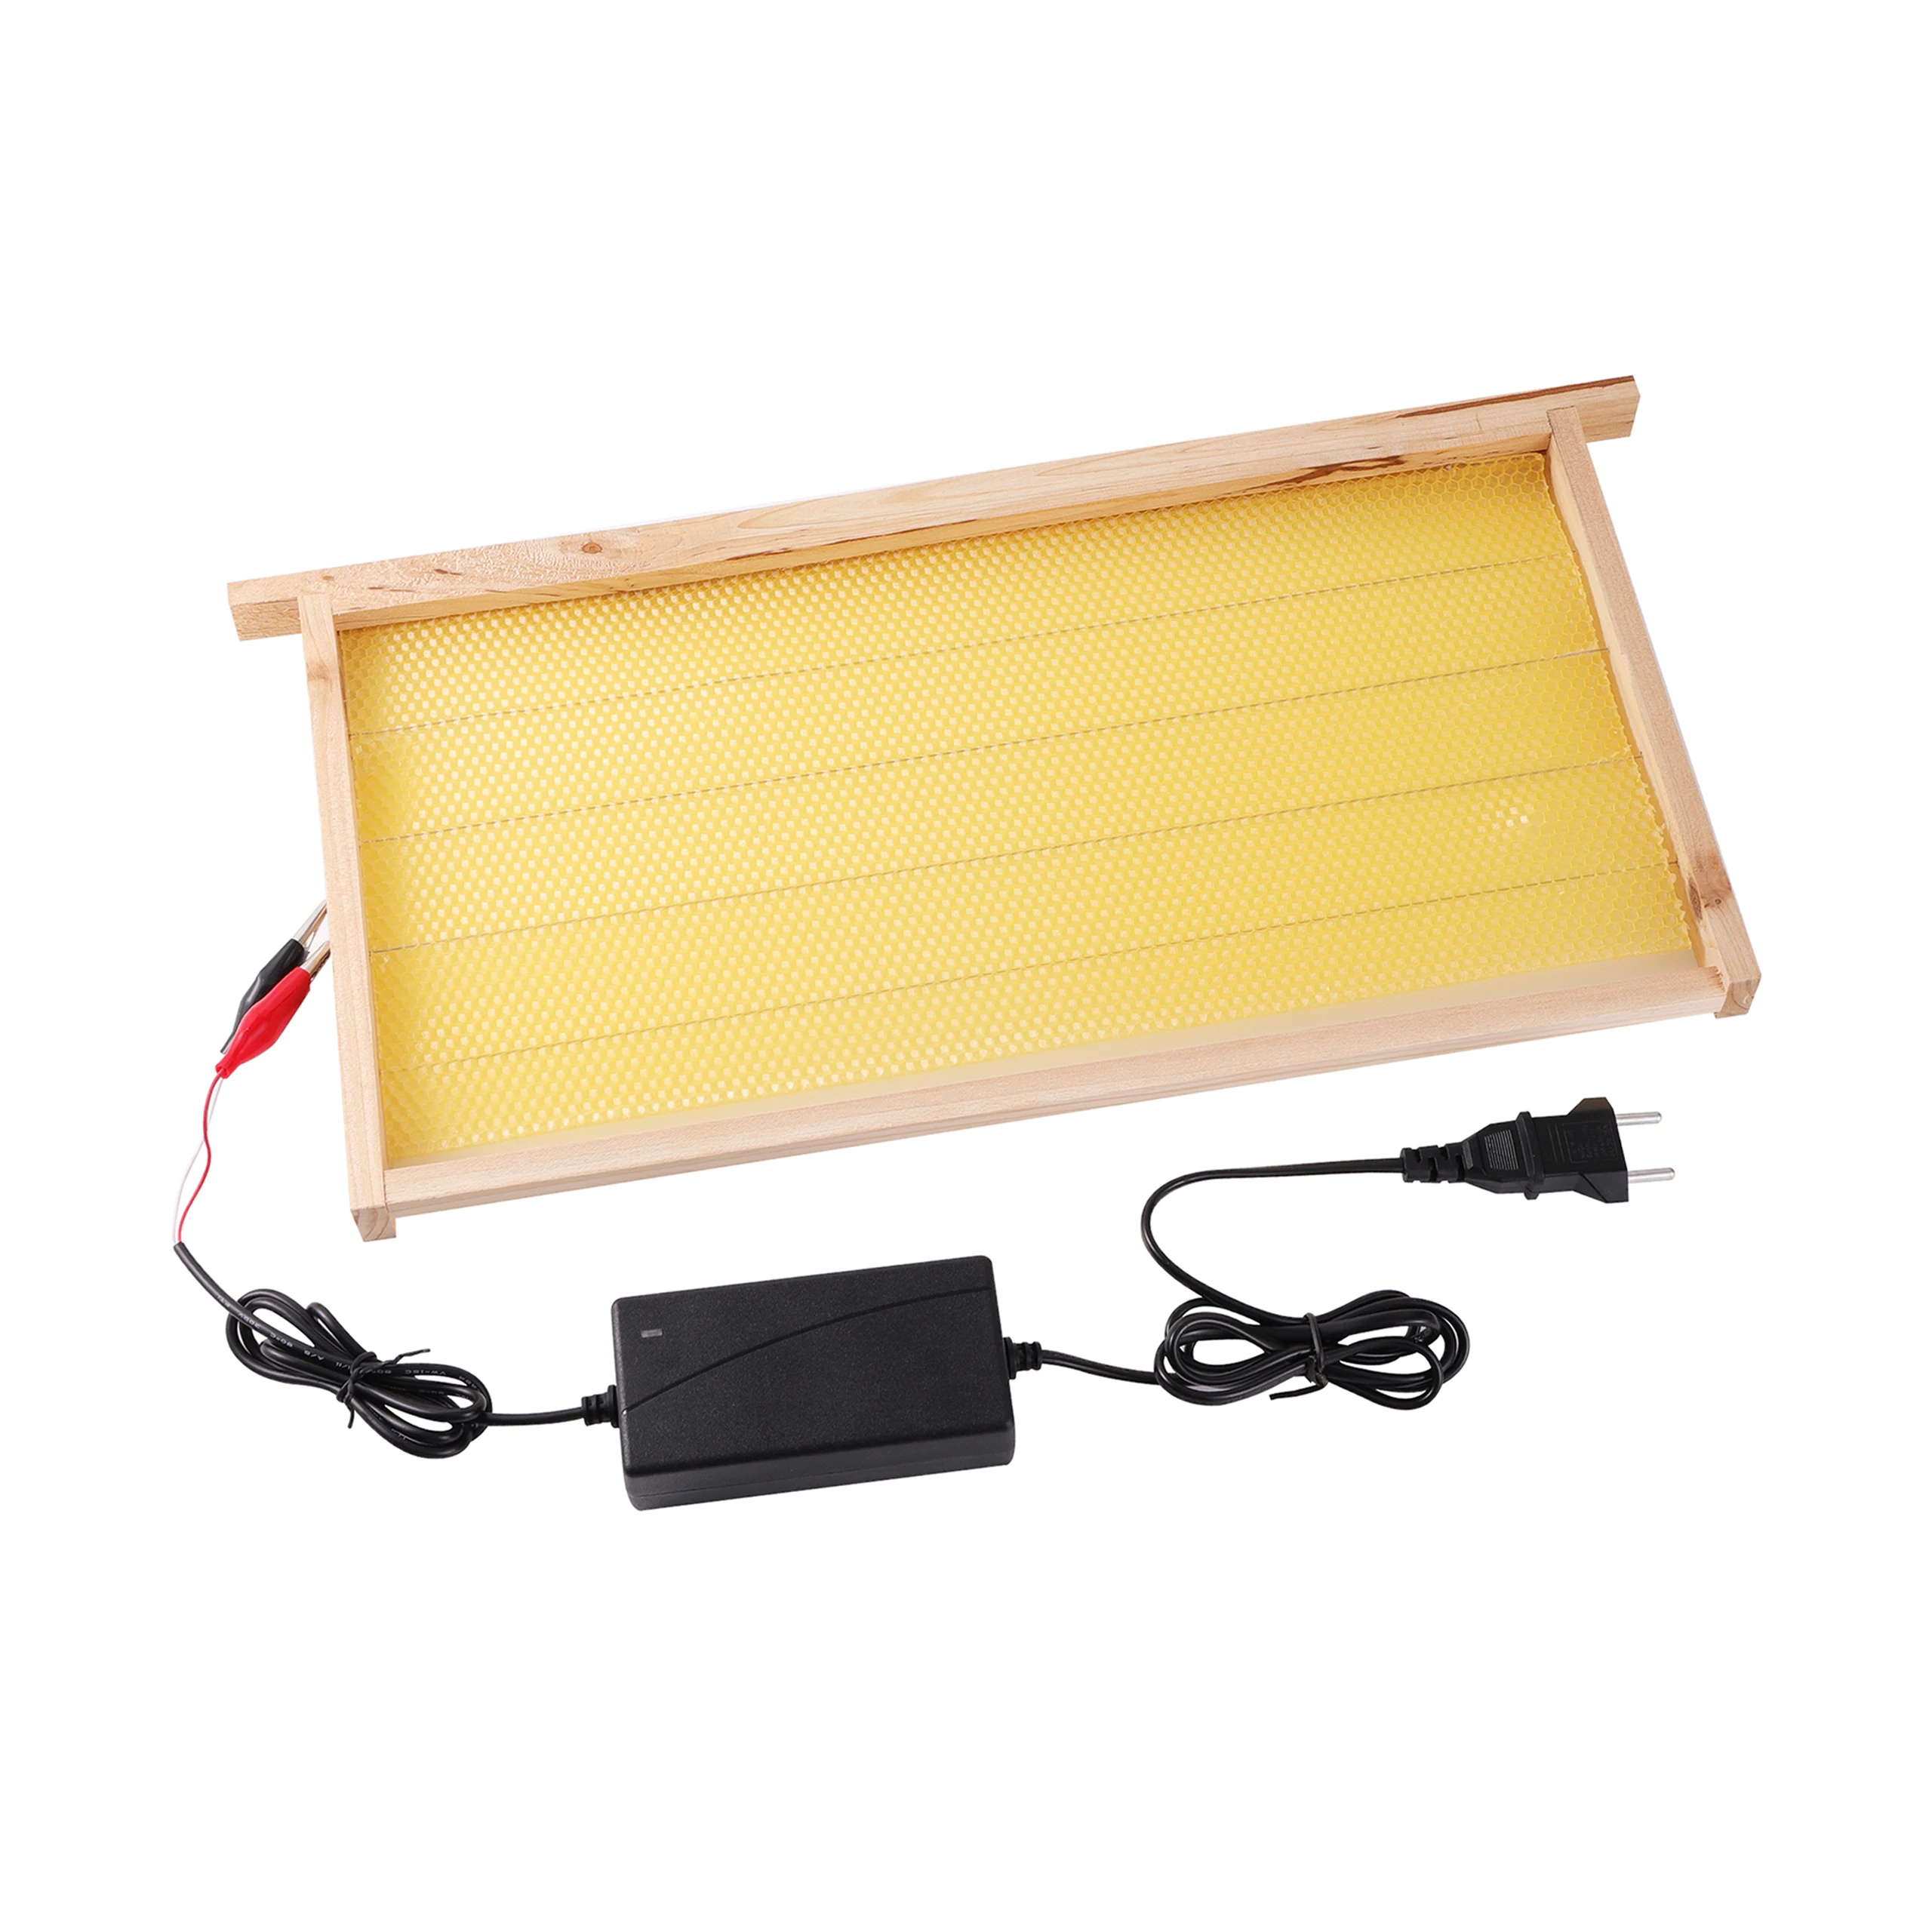 Beekeeping Electric Embedder Heating Device Beehive Installer Equipment Beekeeper Bee Apiculture Tools(AC 100-240V-5A)